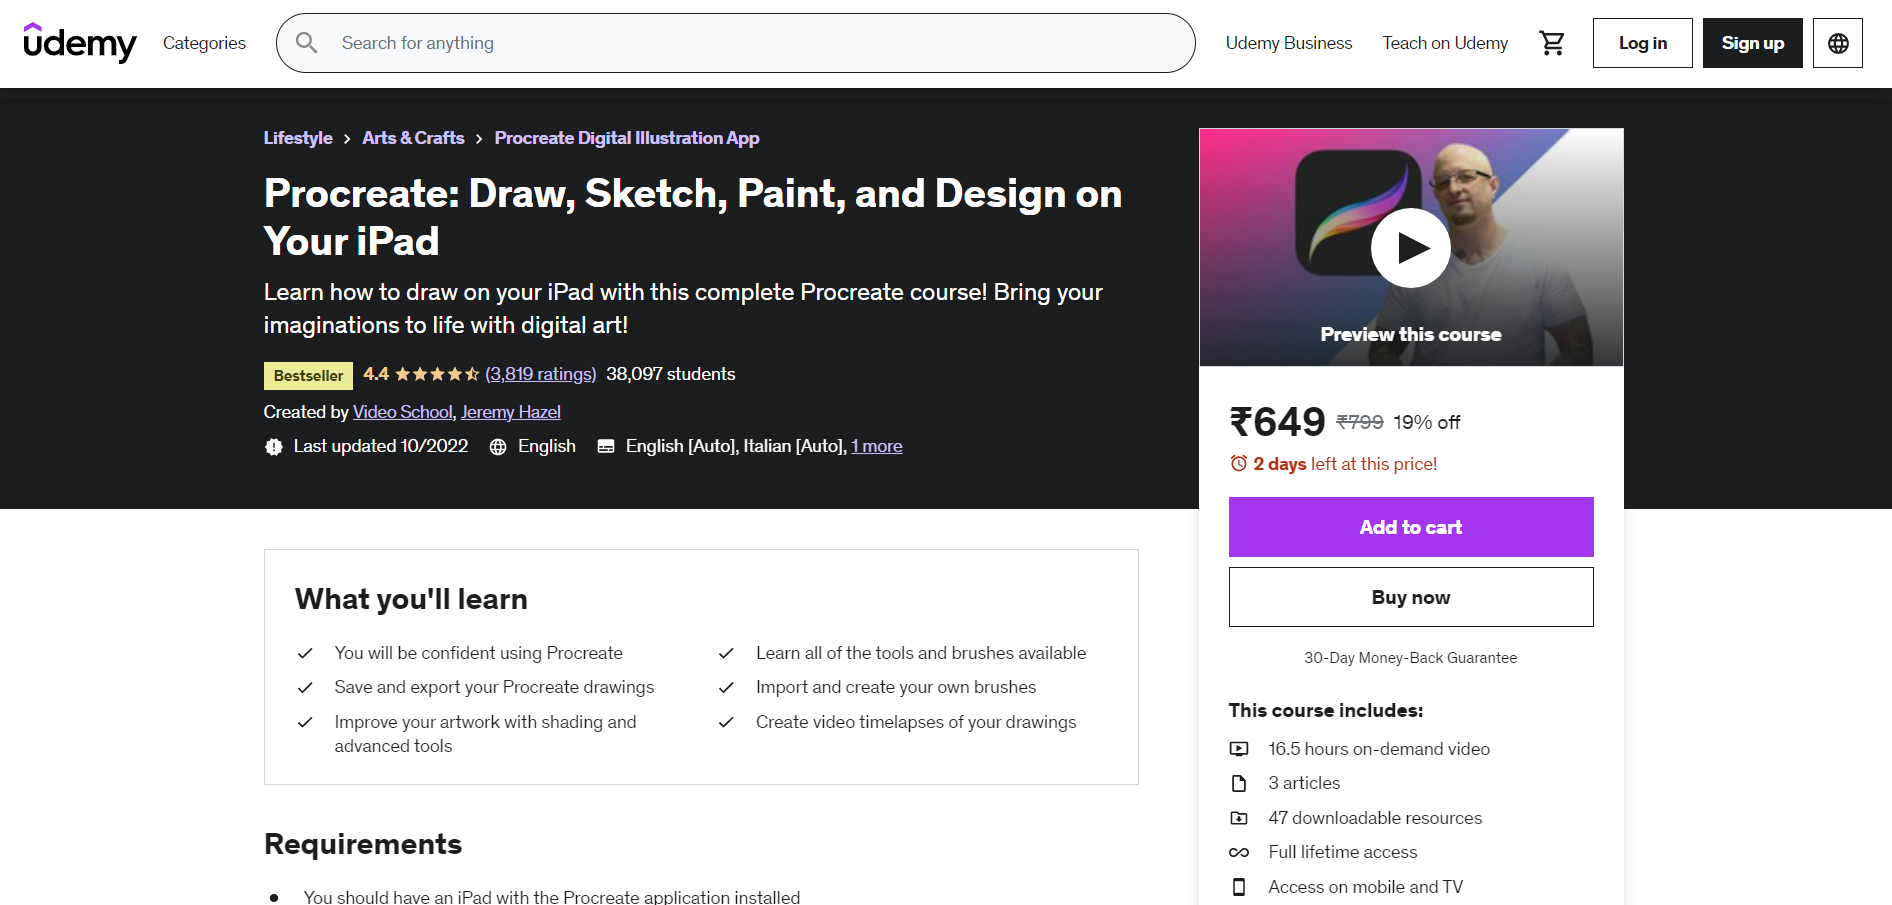 Procreate Draw, Sketch, Paint, and Design on your iPad